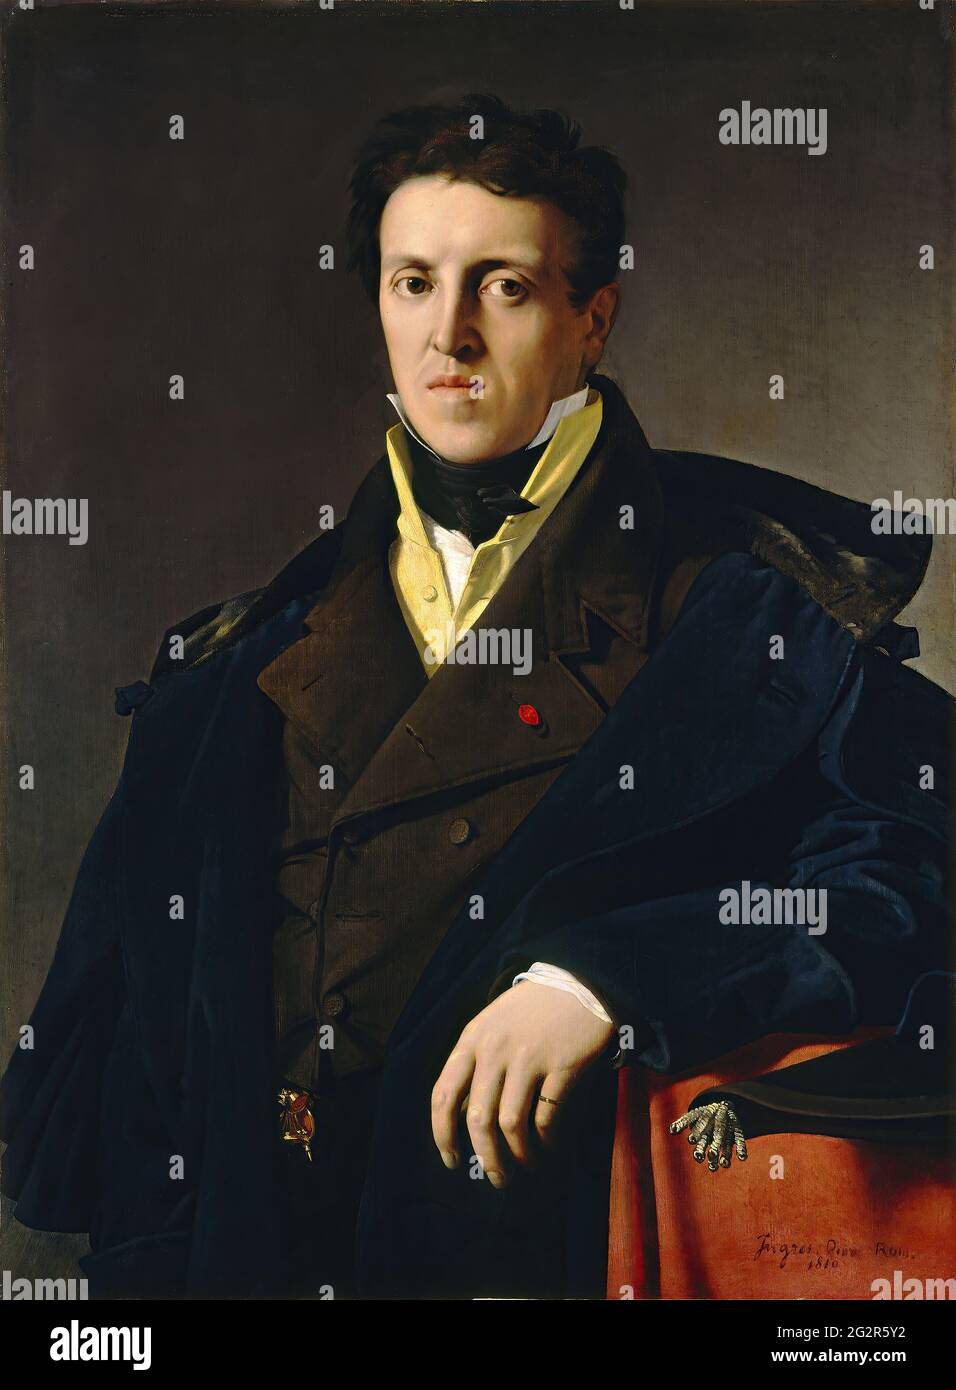 Jean-Auguste-Dominique Ingres - Marcotte Dargenteuil Stock Photo - Alamy